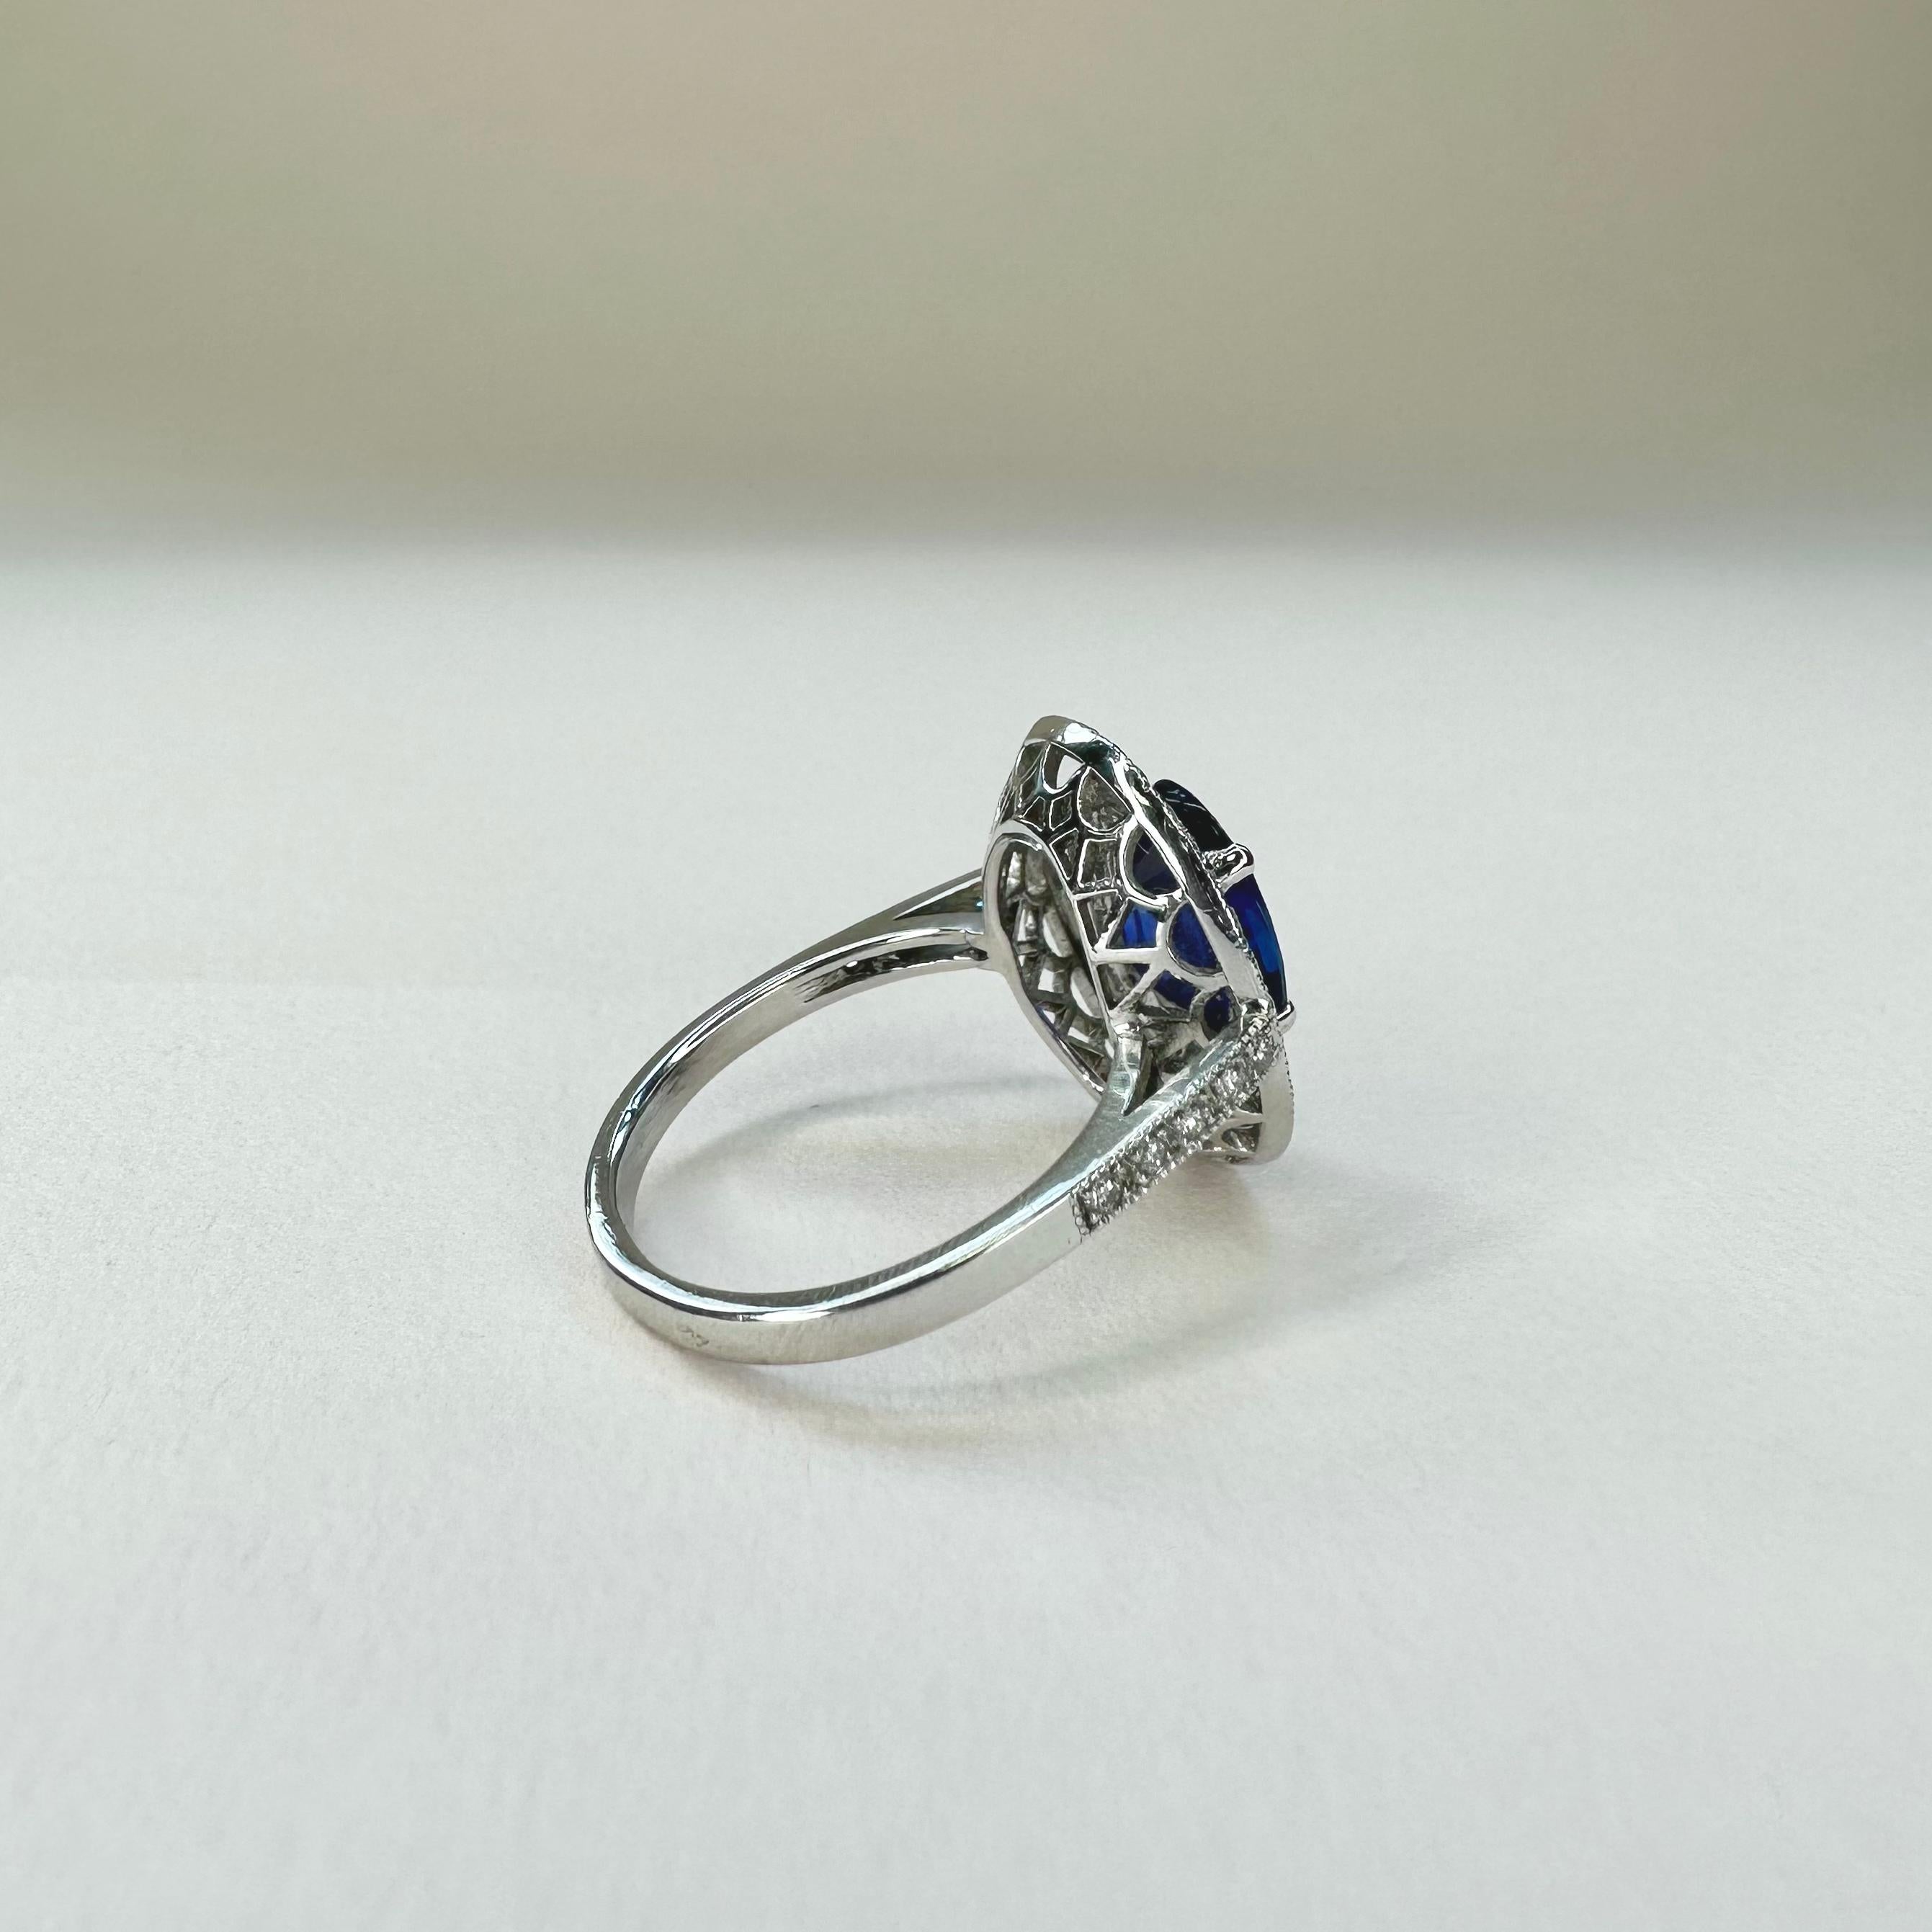 For Sale:  18k White Gold 2.74 Ct Royal Blue Oval Sapphire Ring With Two Rows of Diamonds 6